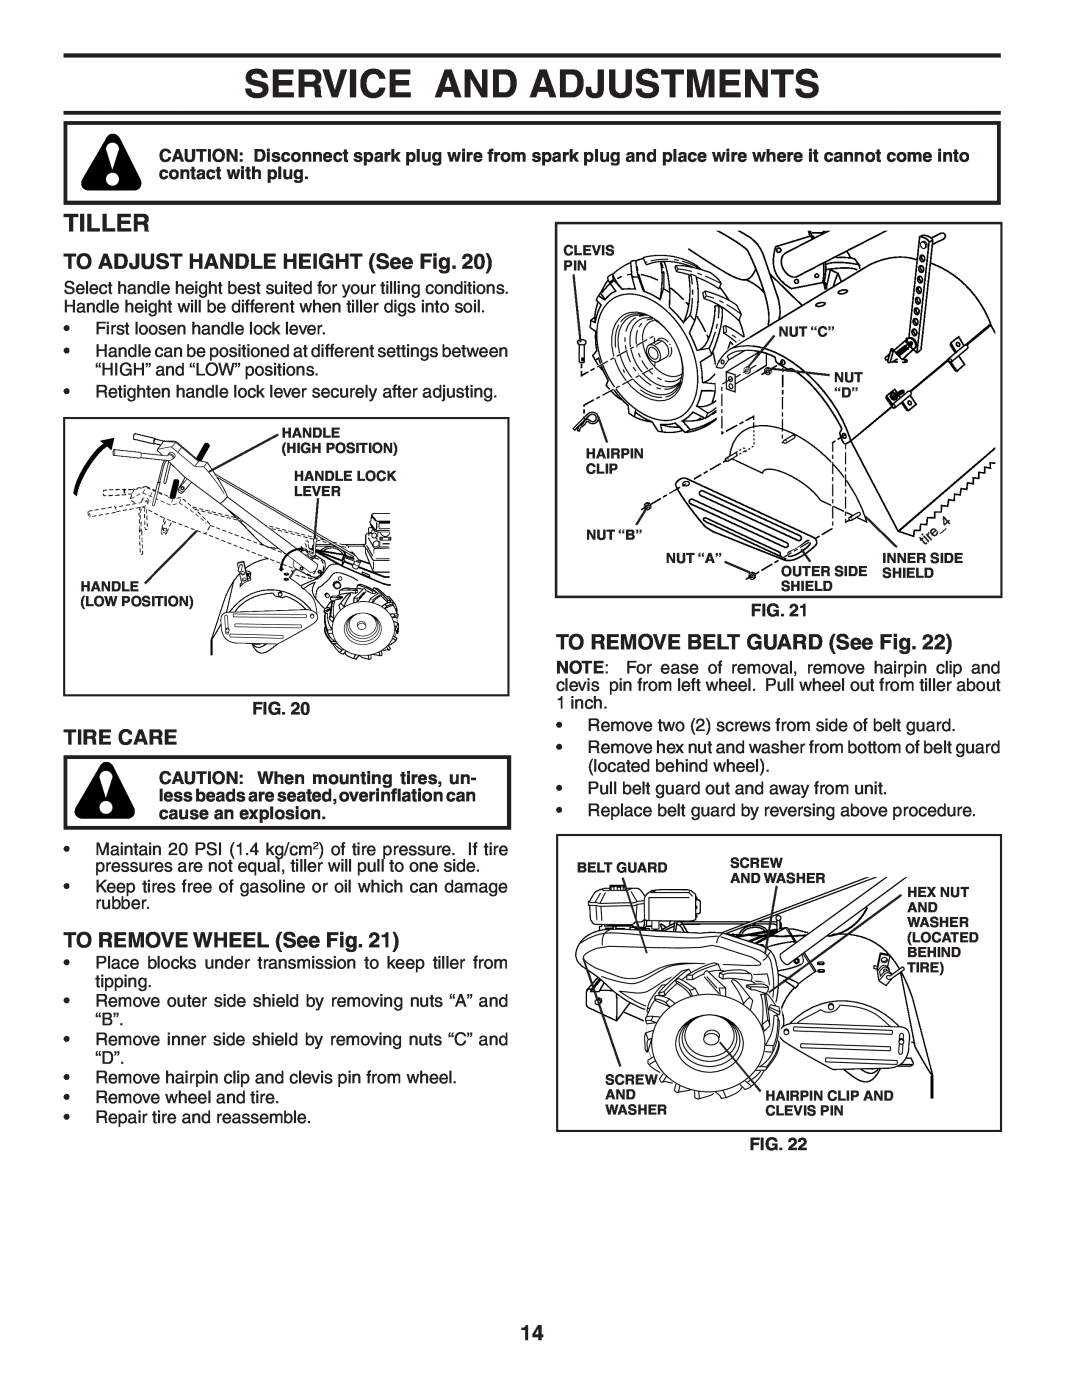 Poulan 96092000400 Service And Adjustments, Tiller, TO ADJUST HANDLE HEIGHT See Fig, Tire Care, TO REMOVE WHEEL See Fig 